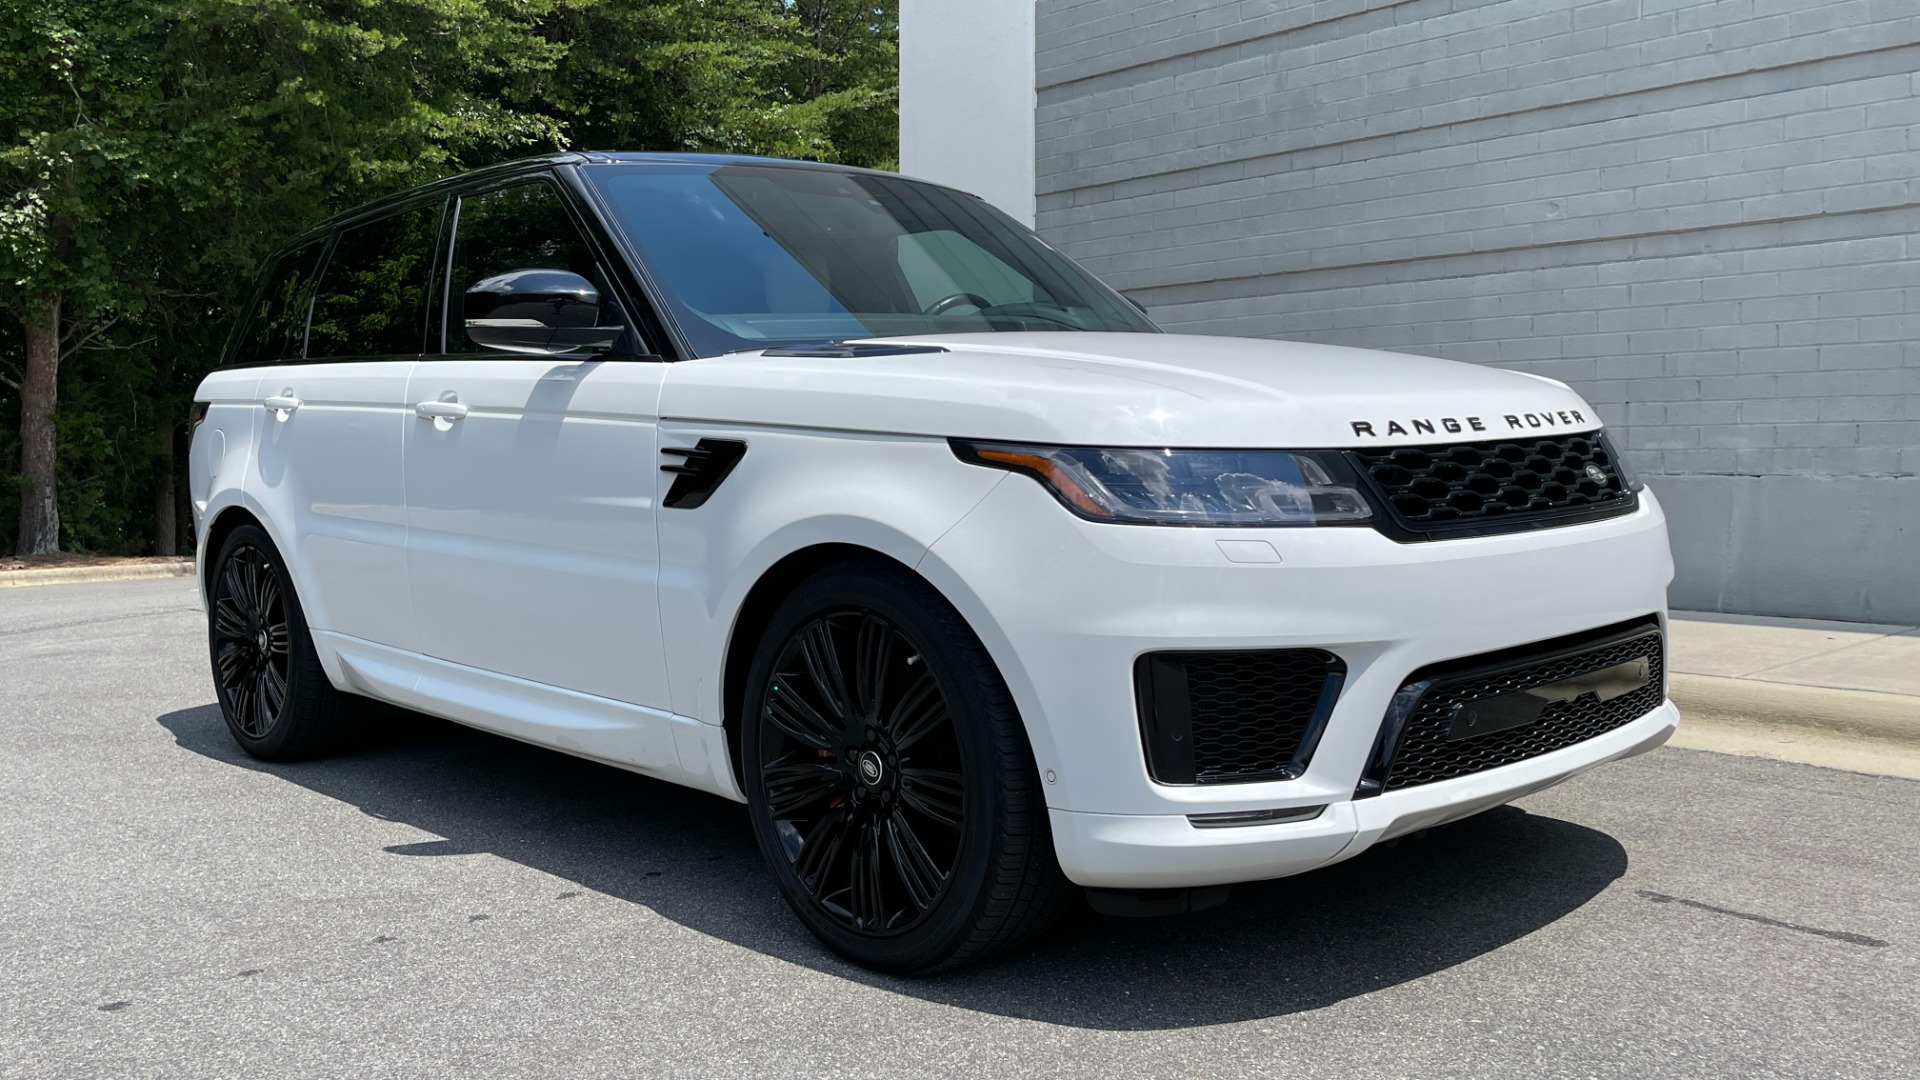 Used 2019 Land Rover Range Rover Sport DYNAMIC / BLACKOUT PACK / VISION ASSIST / 22IN WHEELS for sale $81,999 at Formula Imports in Charlotte NC 28227 4